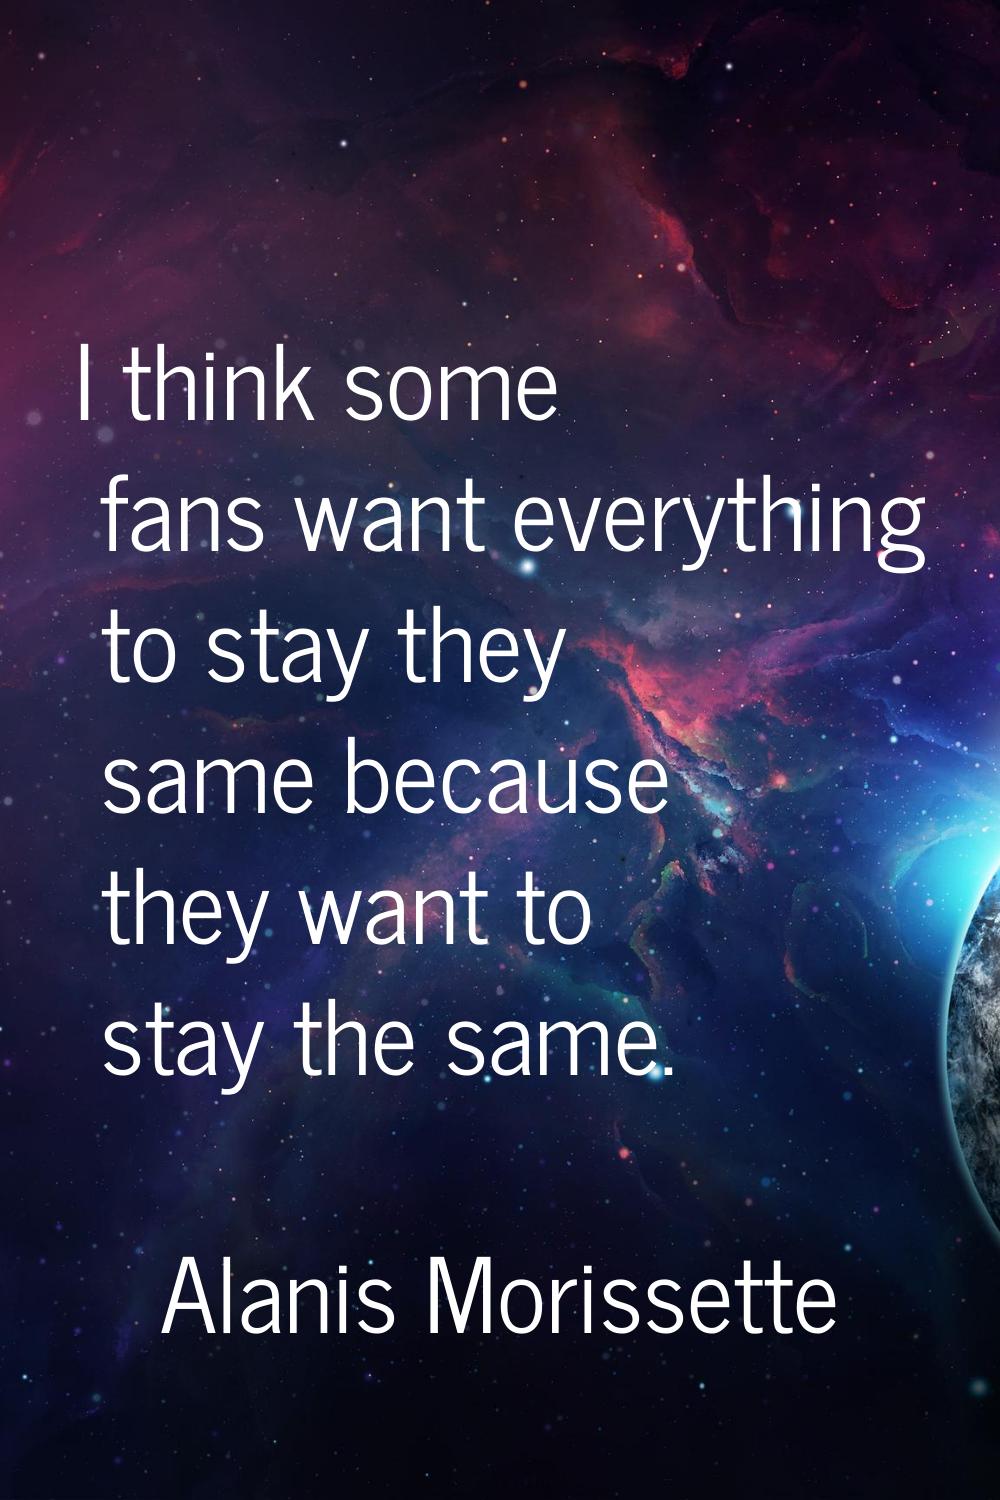 I think some fans want everything to stay they same because they want to stay the same.